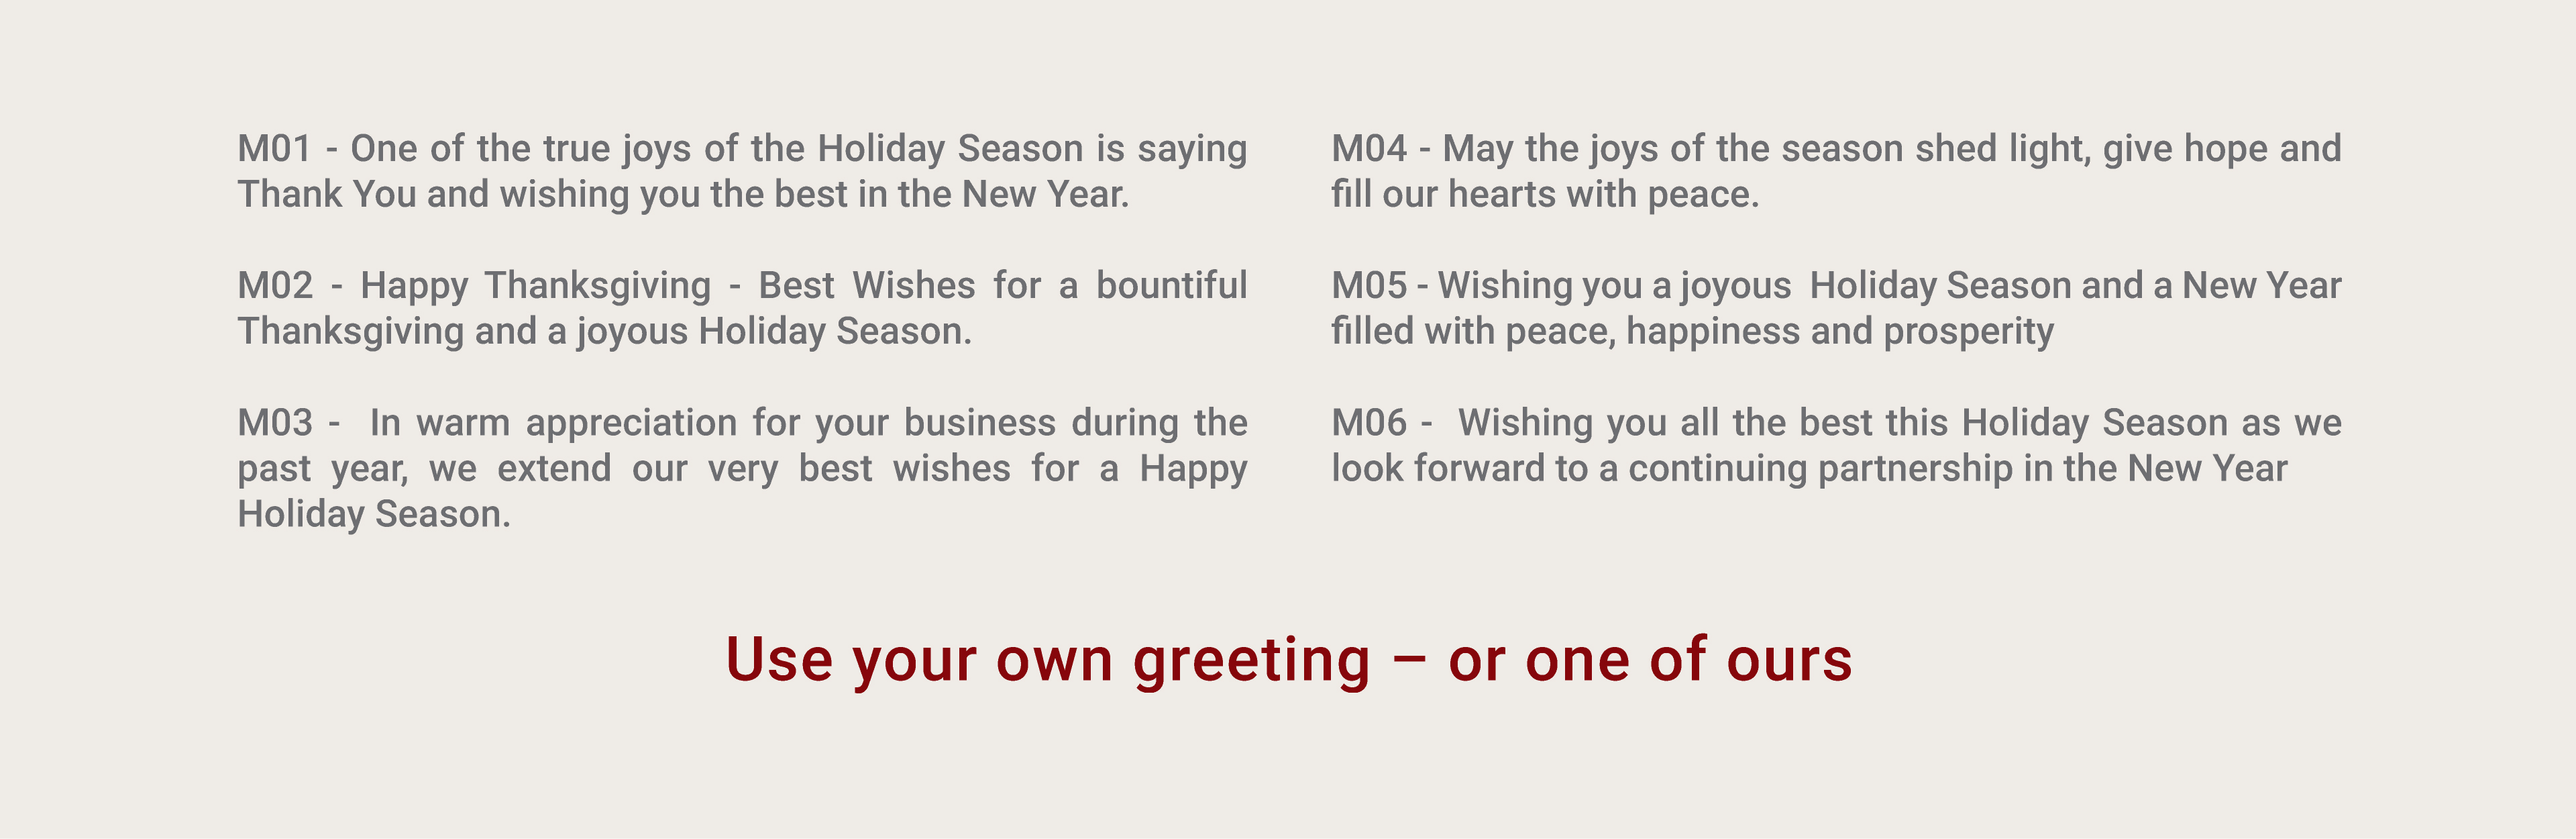 Text on screen, happy thanksgiving, new year, or Holiday Season as options for internal greeting- or use your own!